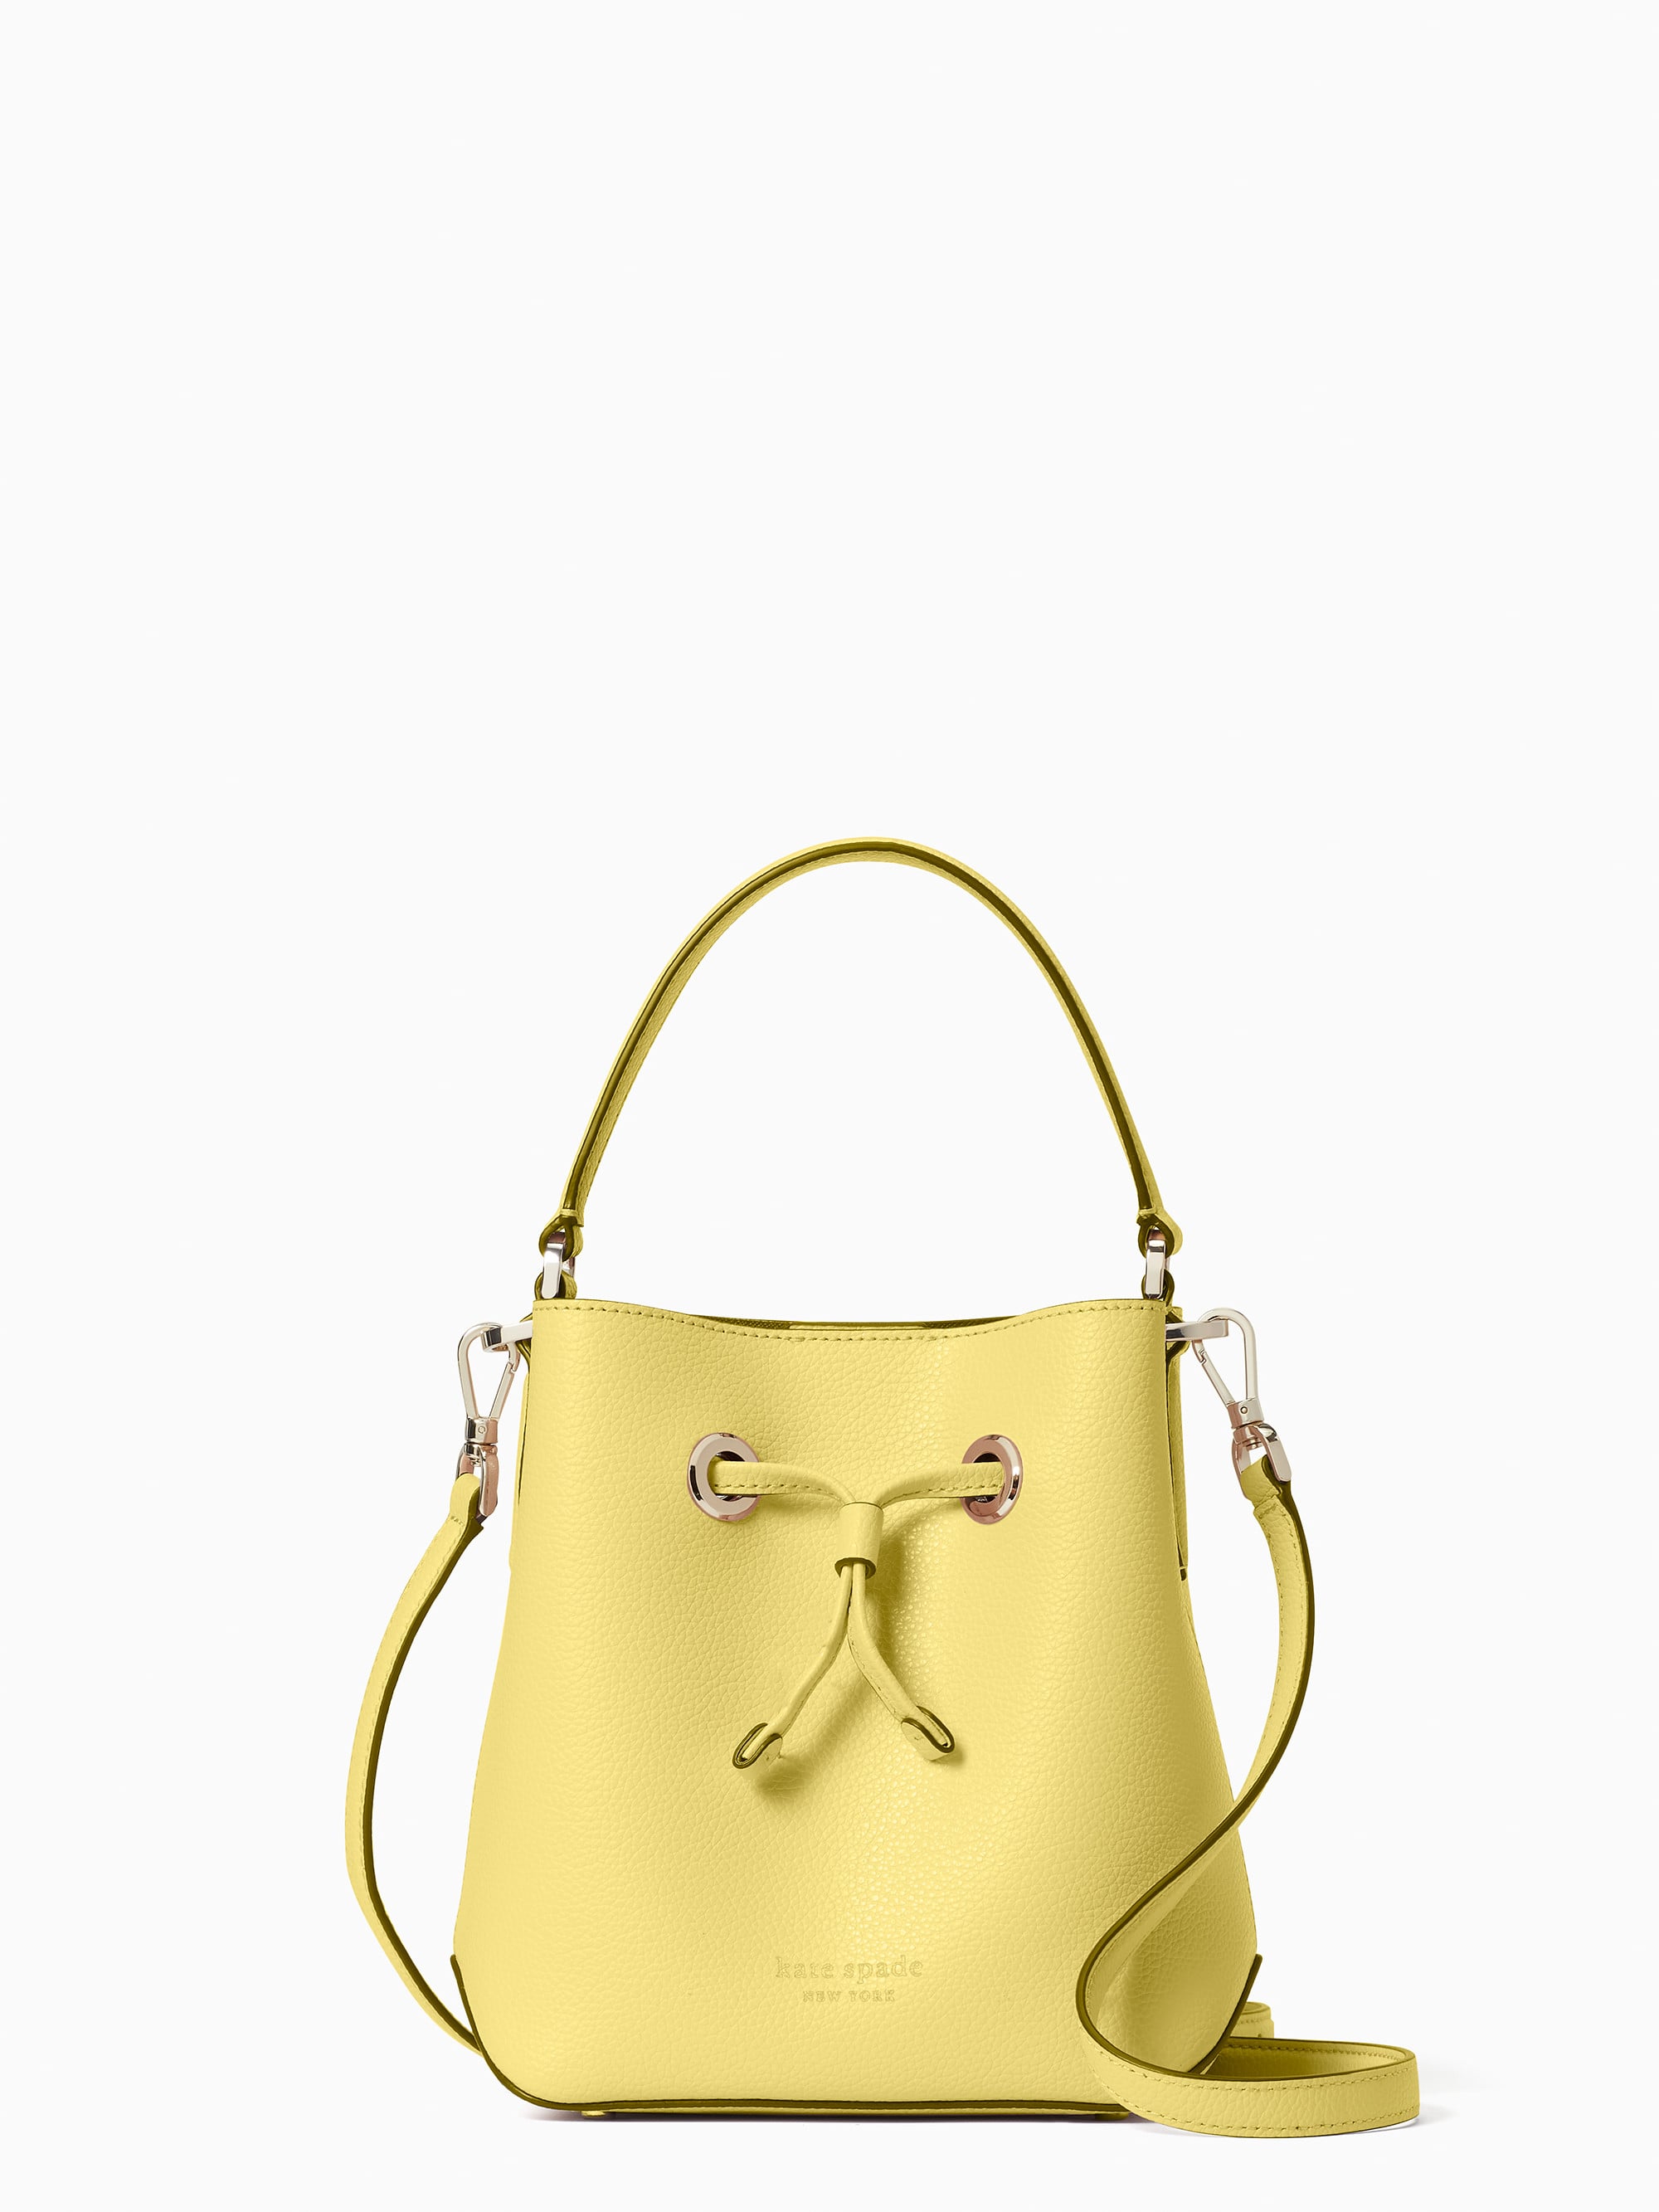 A Colorful Bag: Kate Spade Eva Small Bucket | Shhh! Kate Spade Is Having a  Secret Sale With Discounts You Have to See to Believe | POPSUGAR Fashion  Photo 18